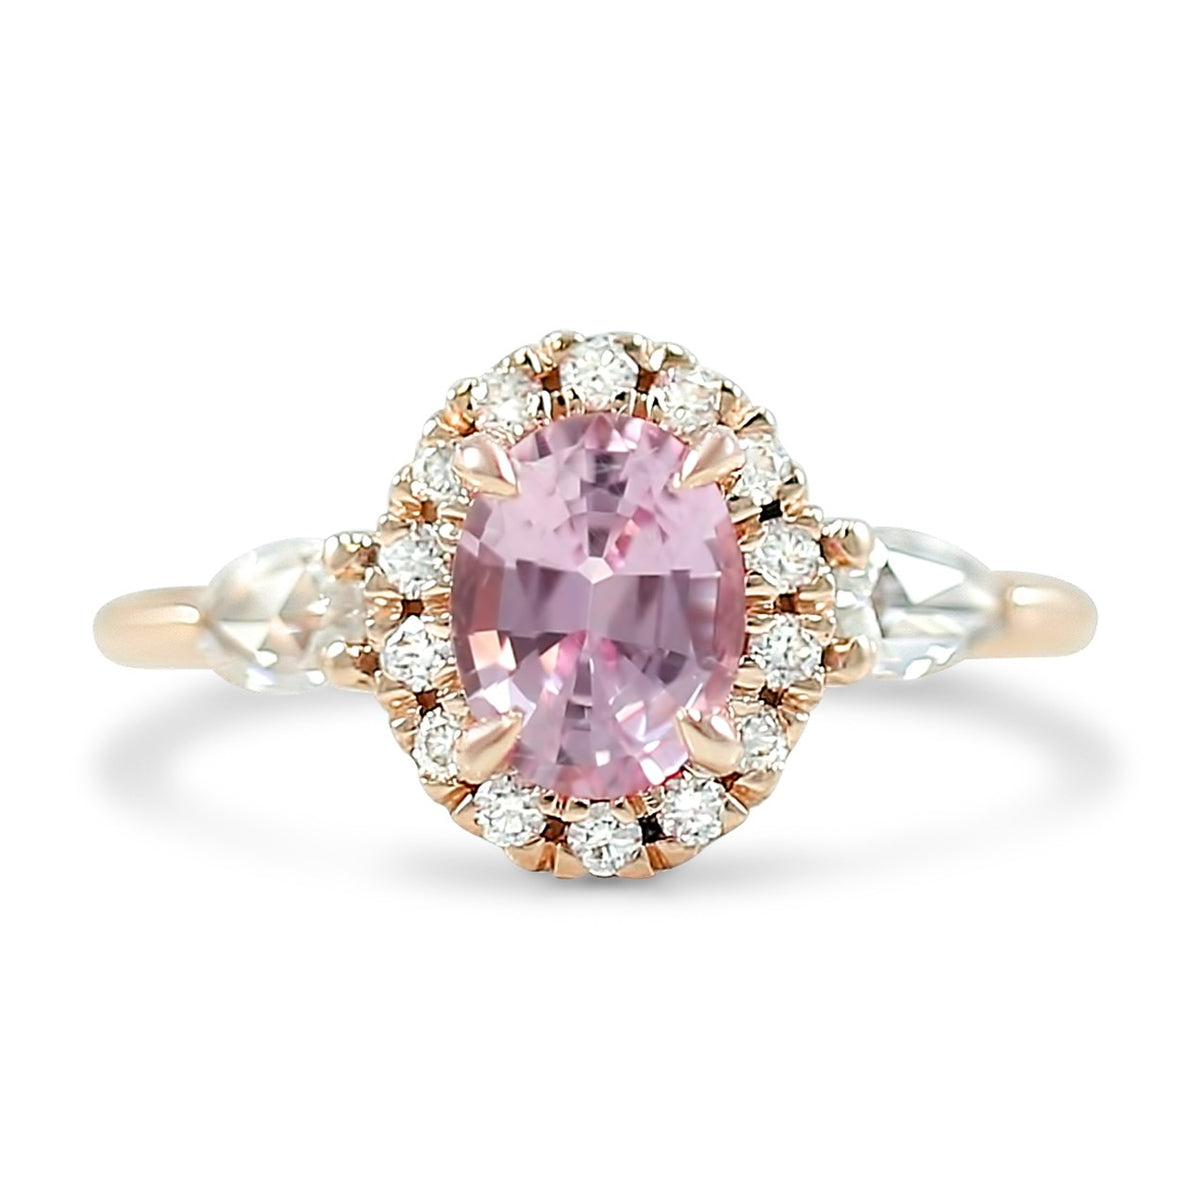 1.31ct pink oval sapphire set in 14k rose gold with a diamond halo and pear shaped diamond side stones